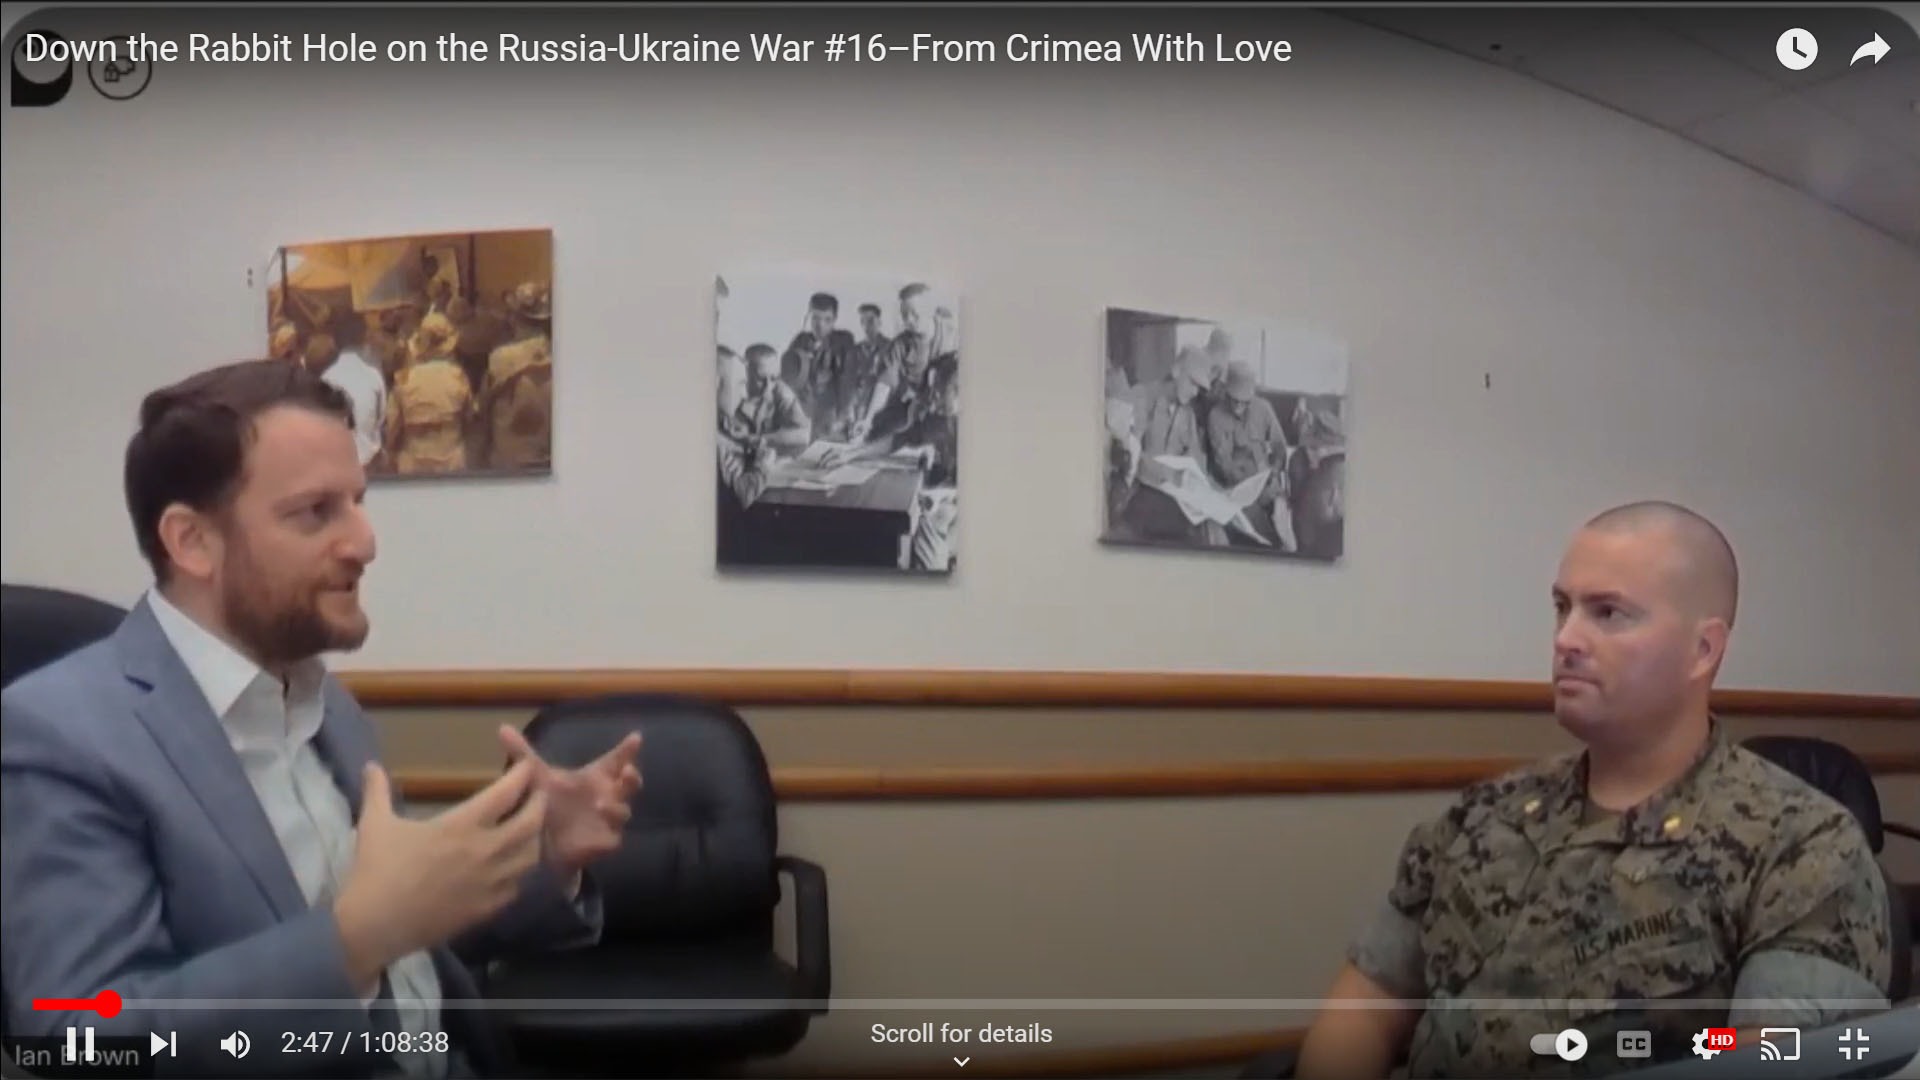 “Down the Rabbit Hole on the Russia-Ukraine War” with Dr. Yuval Weber